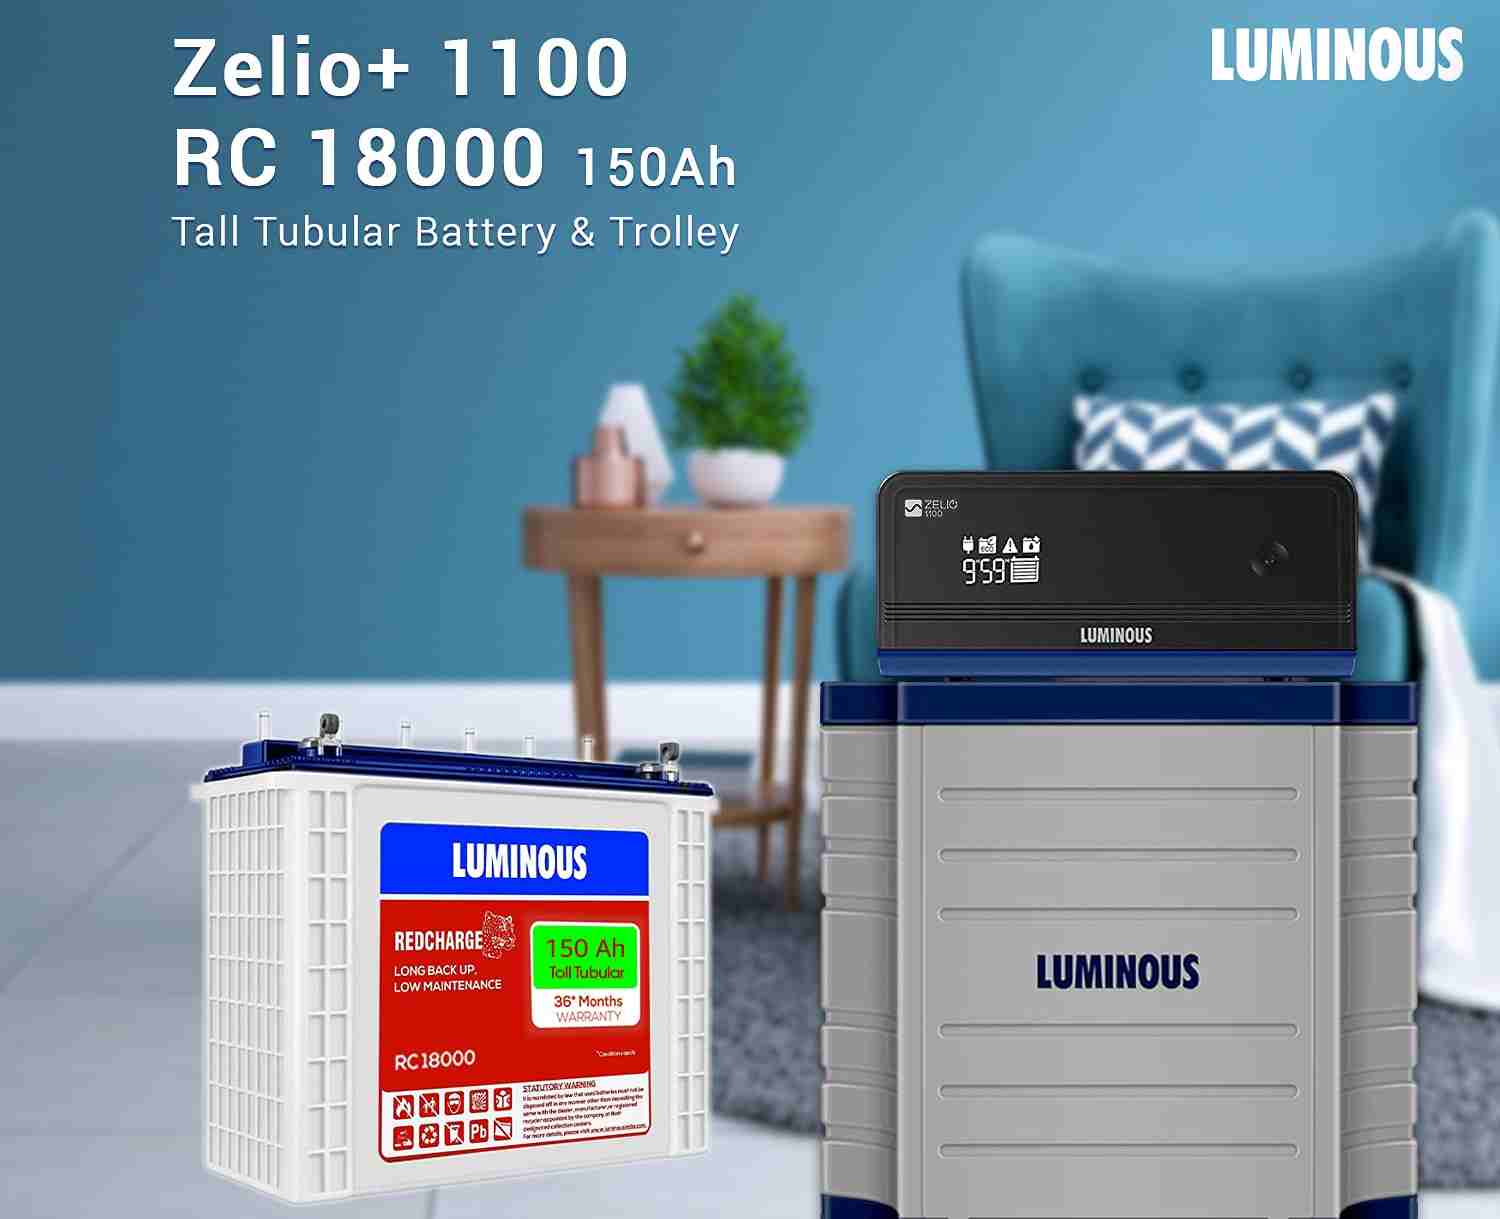 Luminous Zelio+ 1100 Inverter with Red Charge 15000 120 AH Tubular Battery